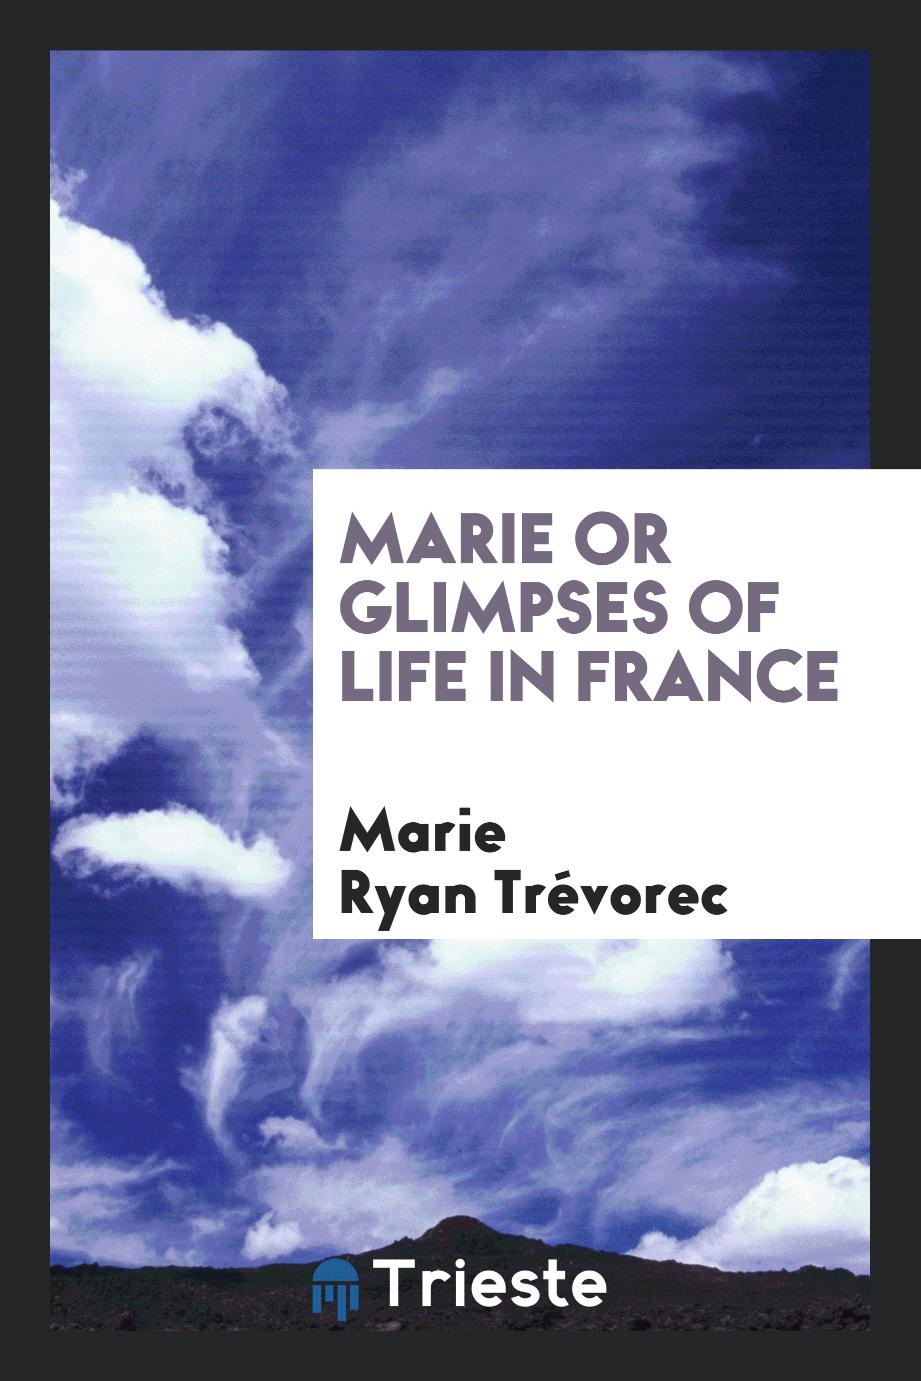 Marie or Glimpses of life in France